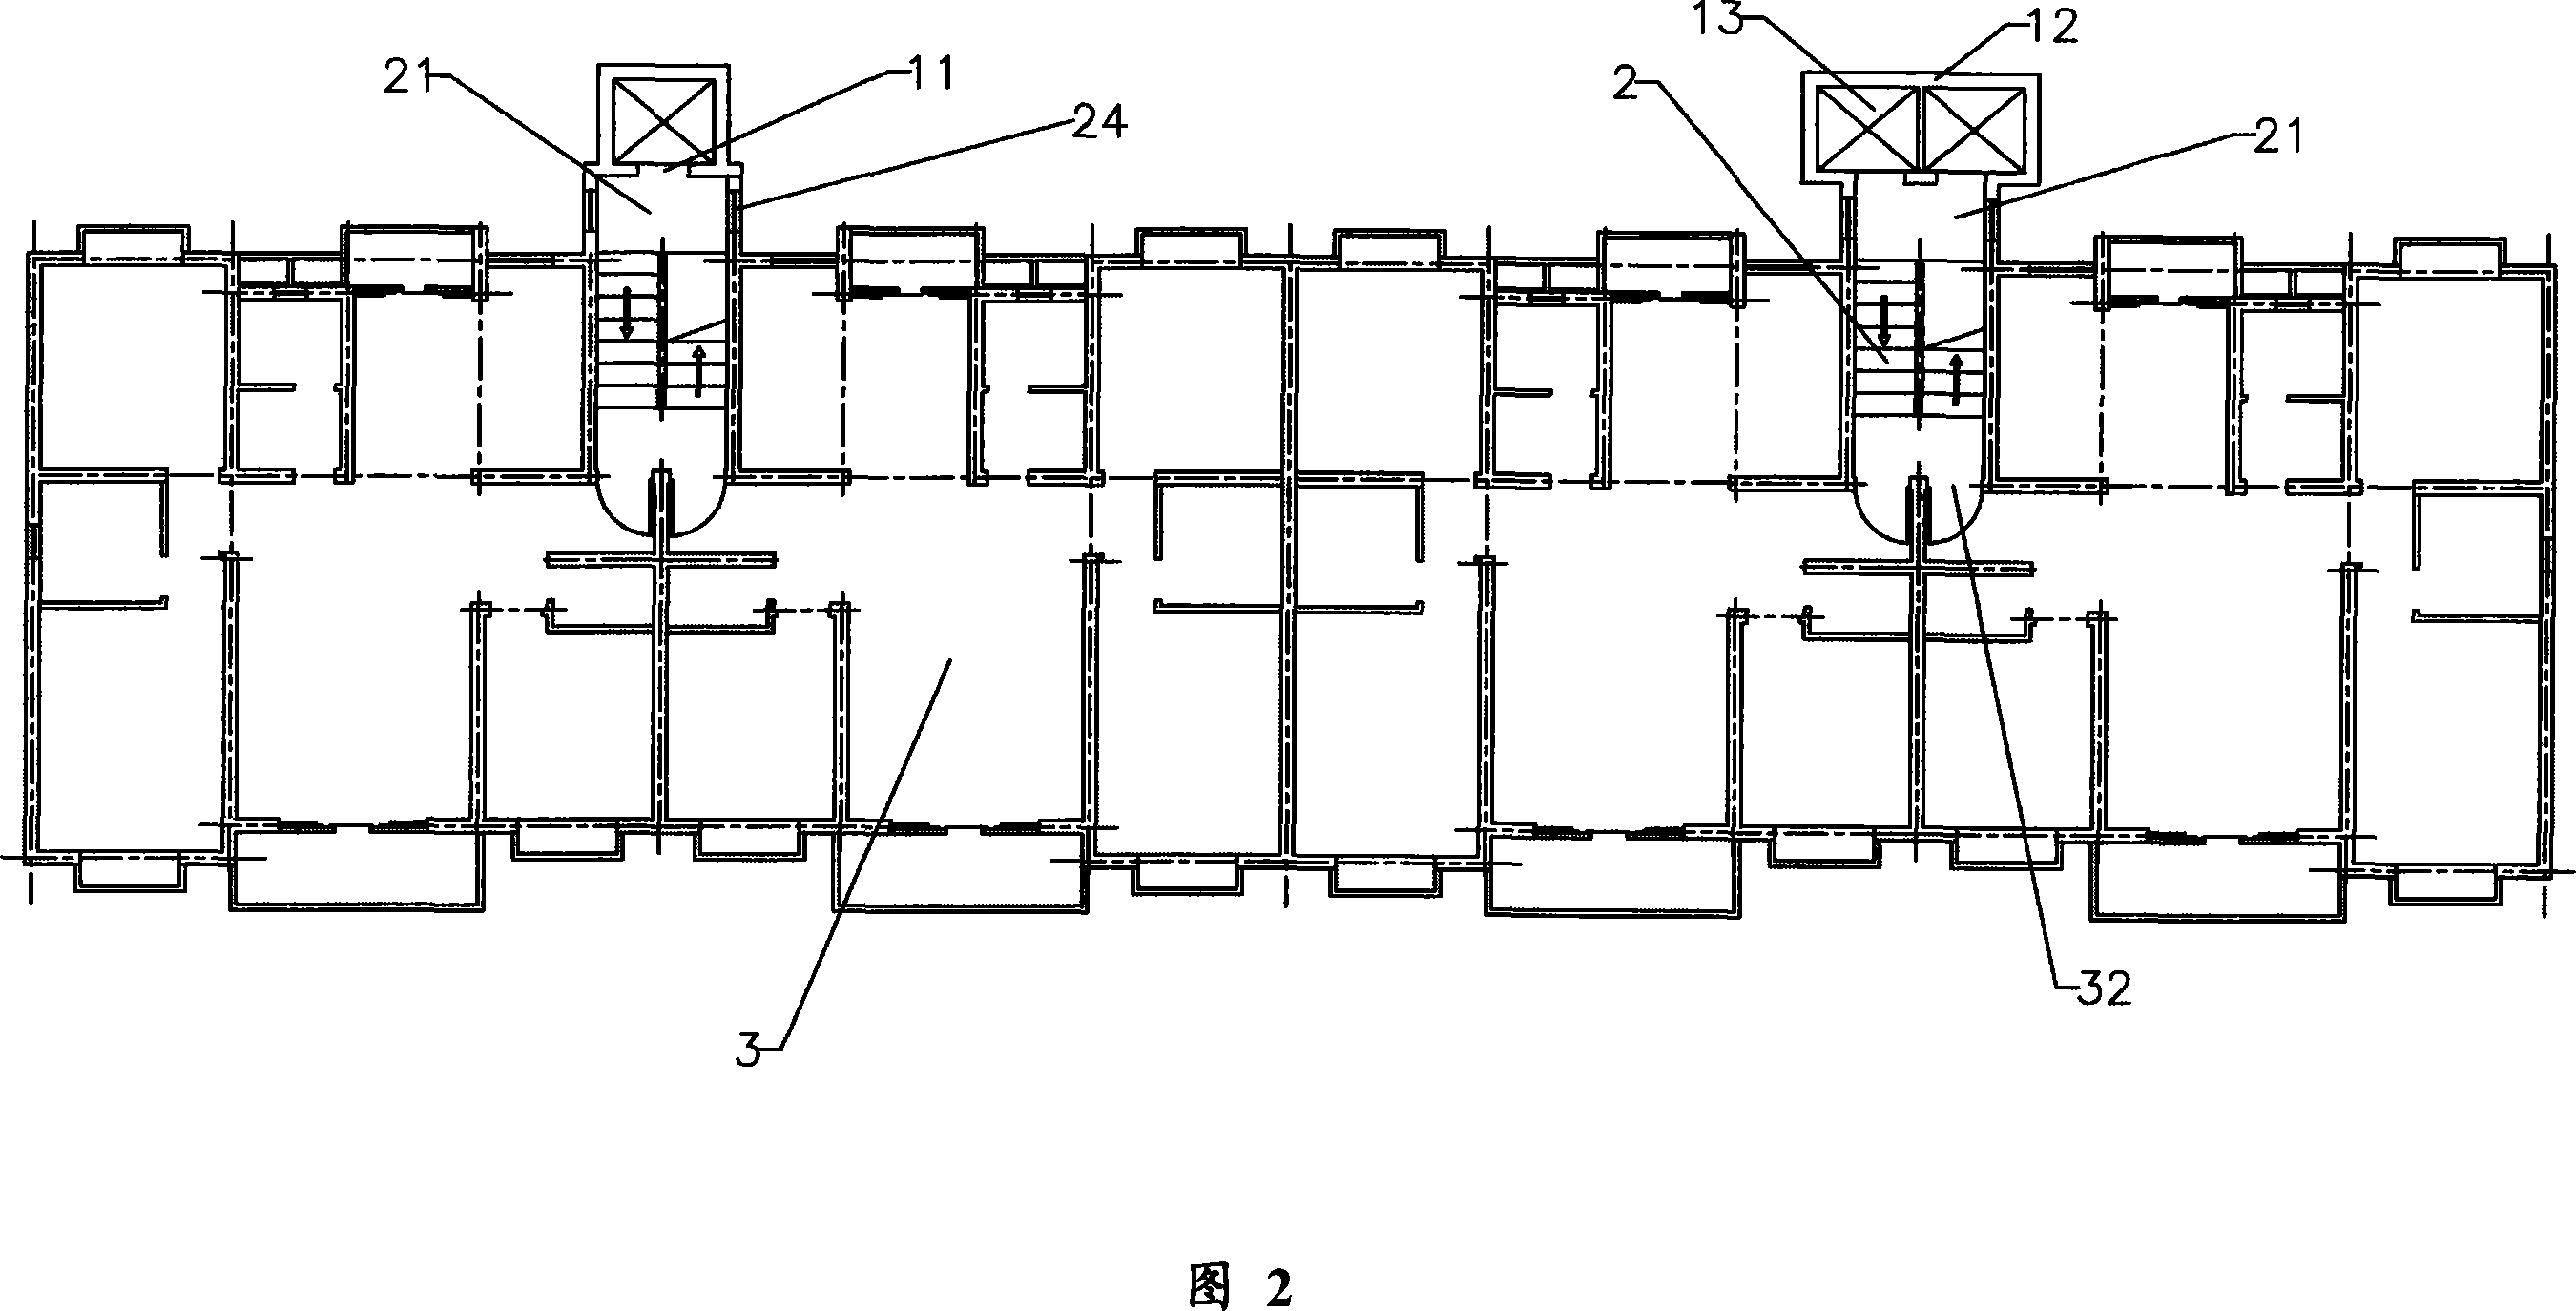 Sharing structure of storied building elevator and stairs